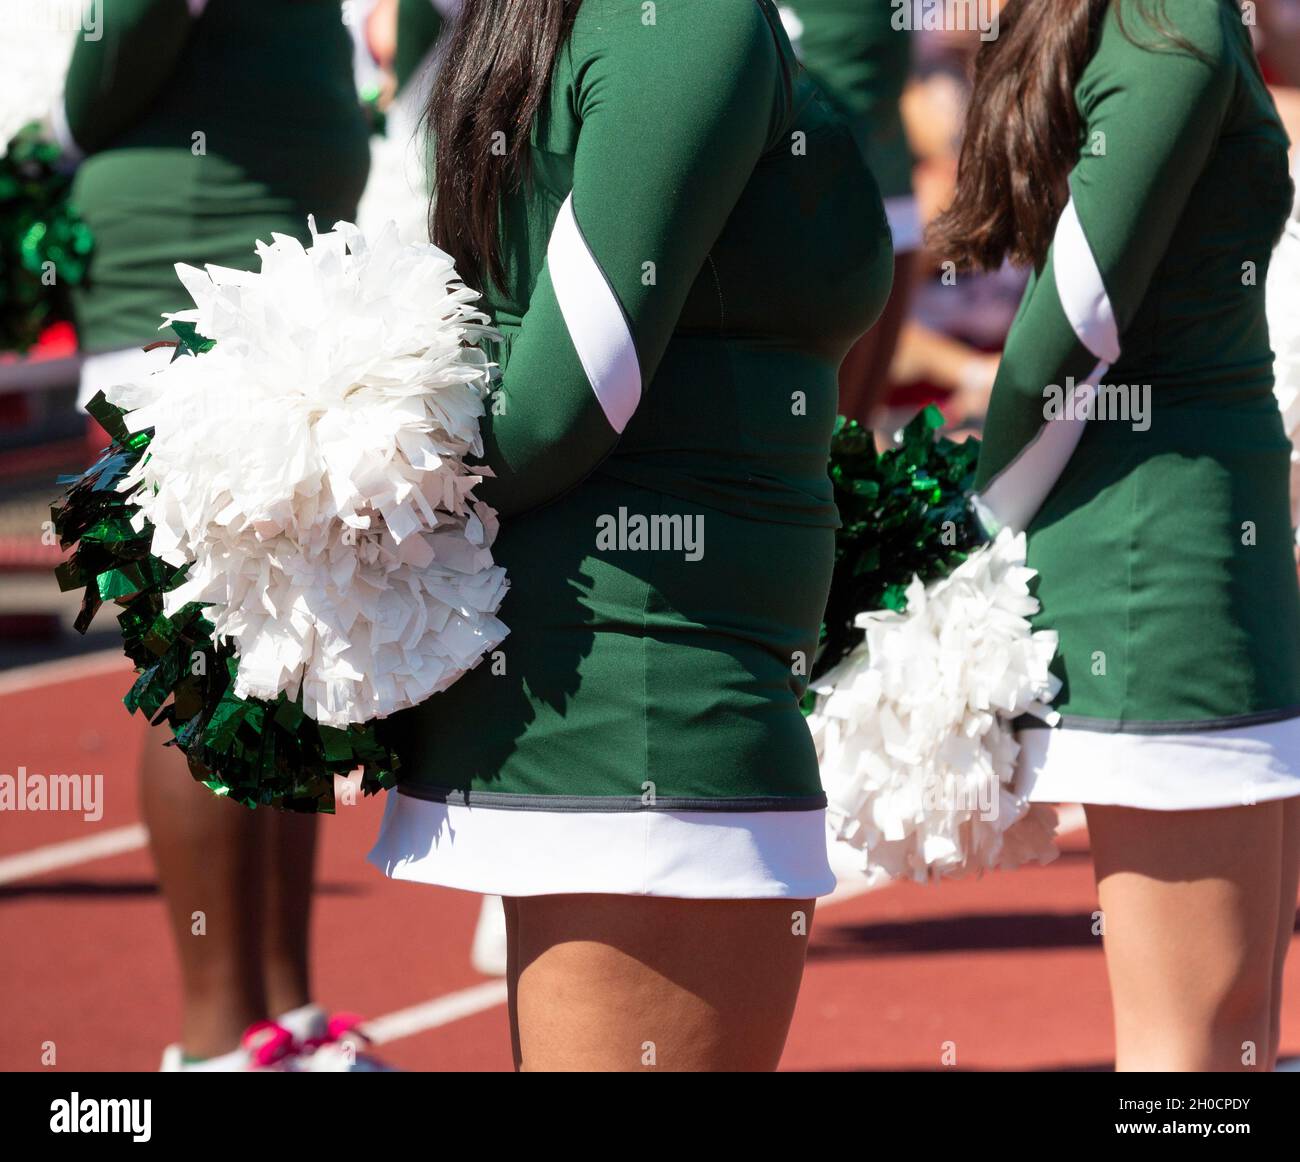 Close up of high school cheerleaders in green uniforms holding white and green pom poms behind their backs. Stock Photo